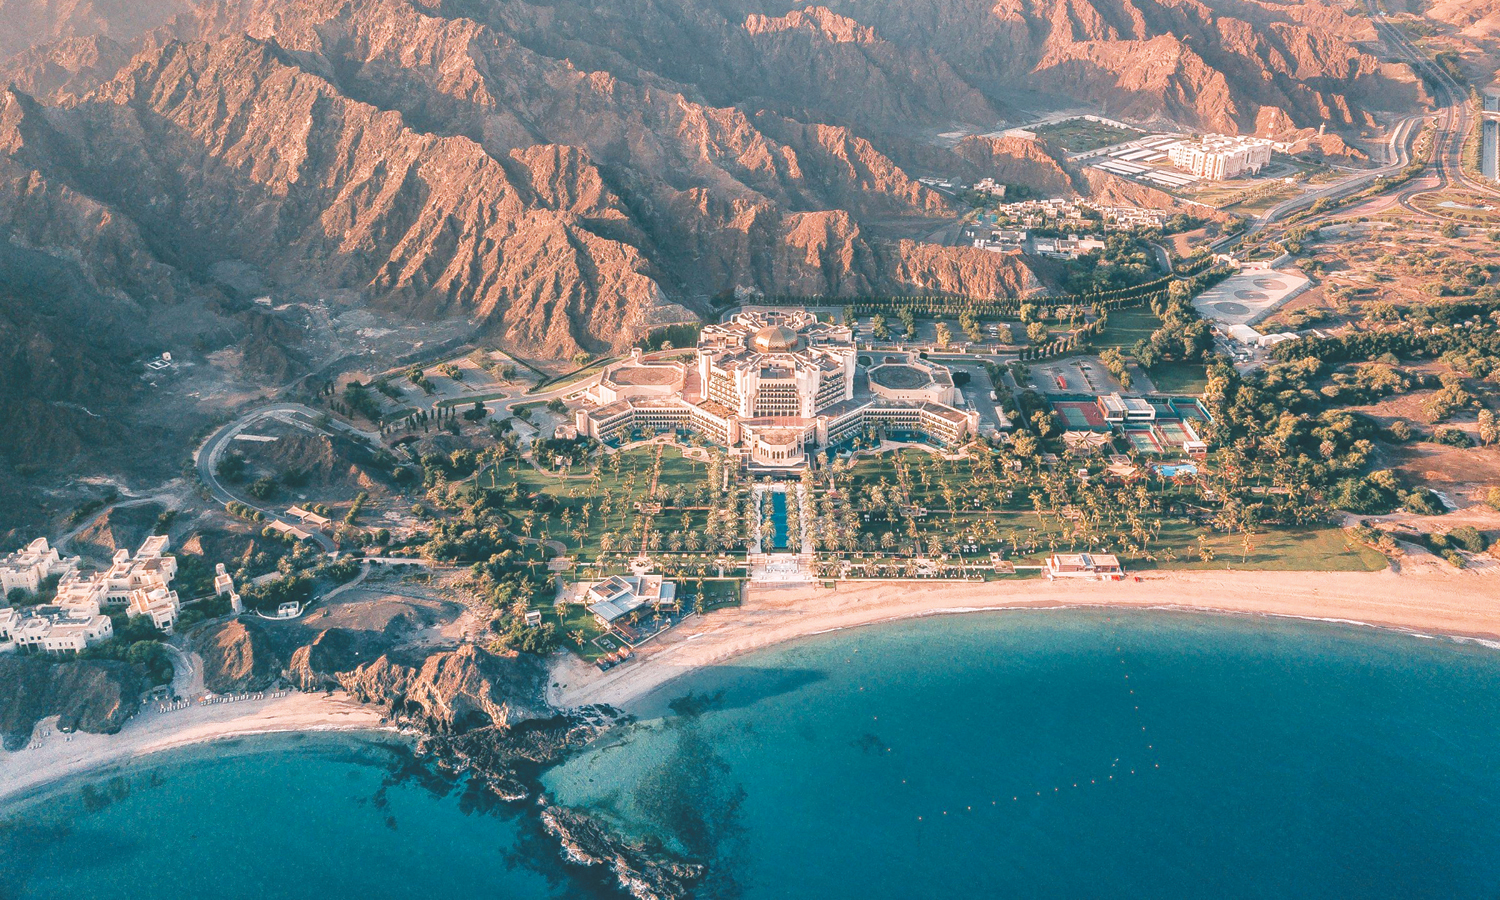 13-Oman-tourism-economy-valued-at-RO-1.3bn-in-2019